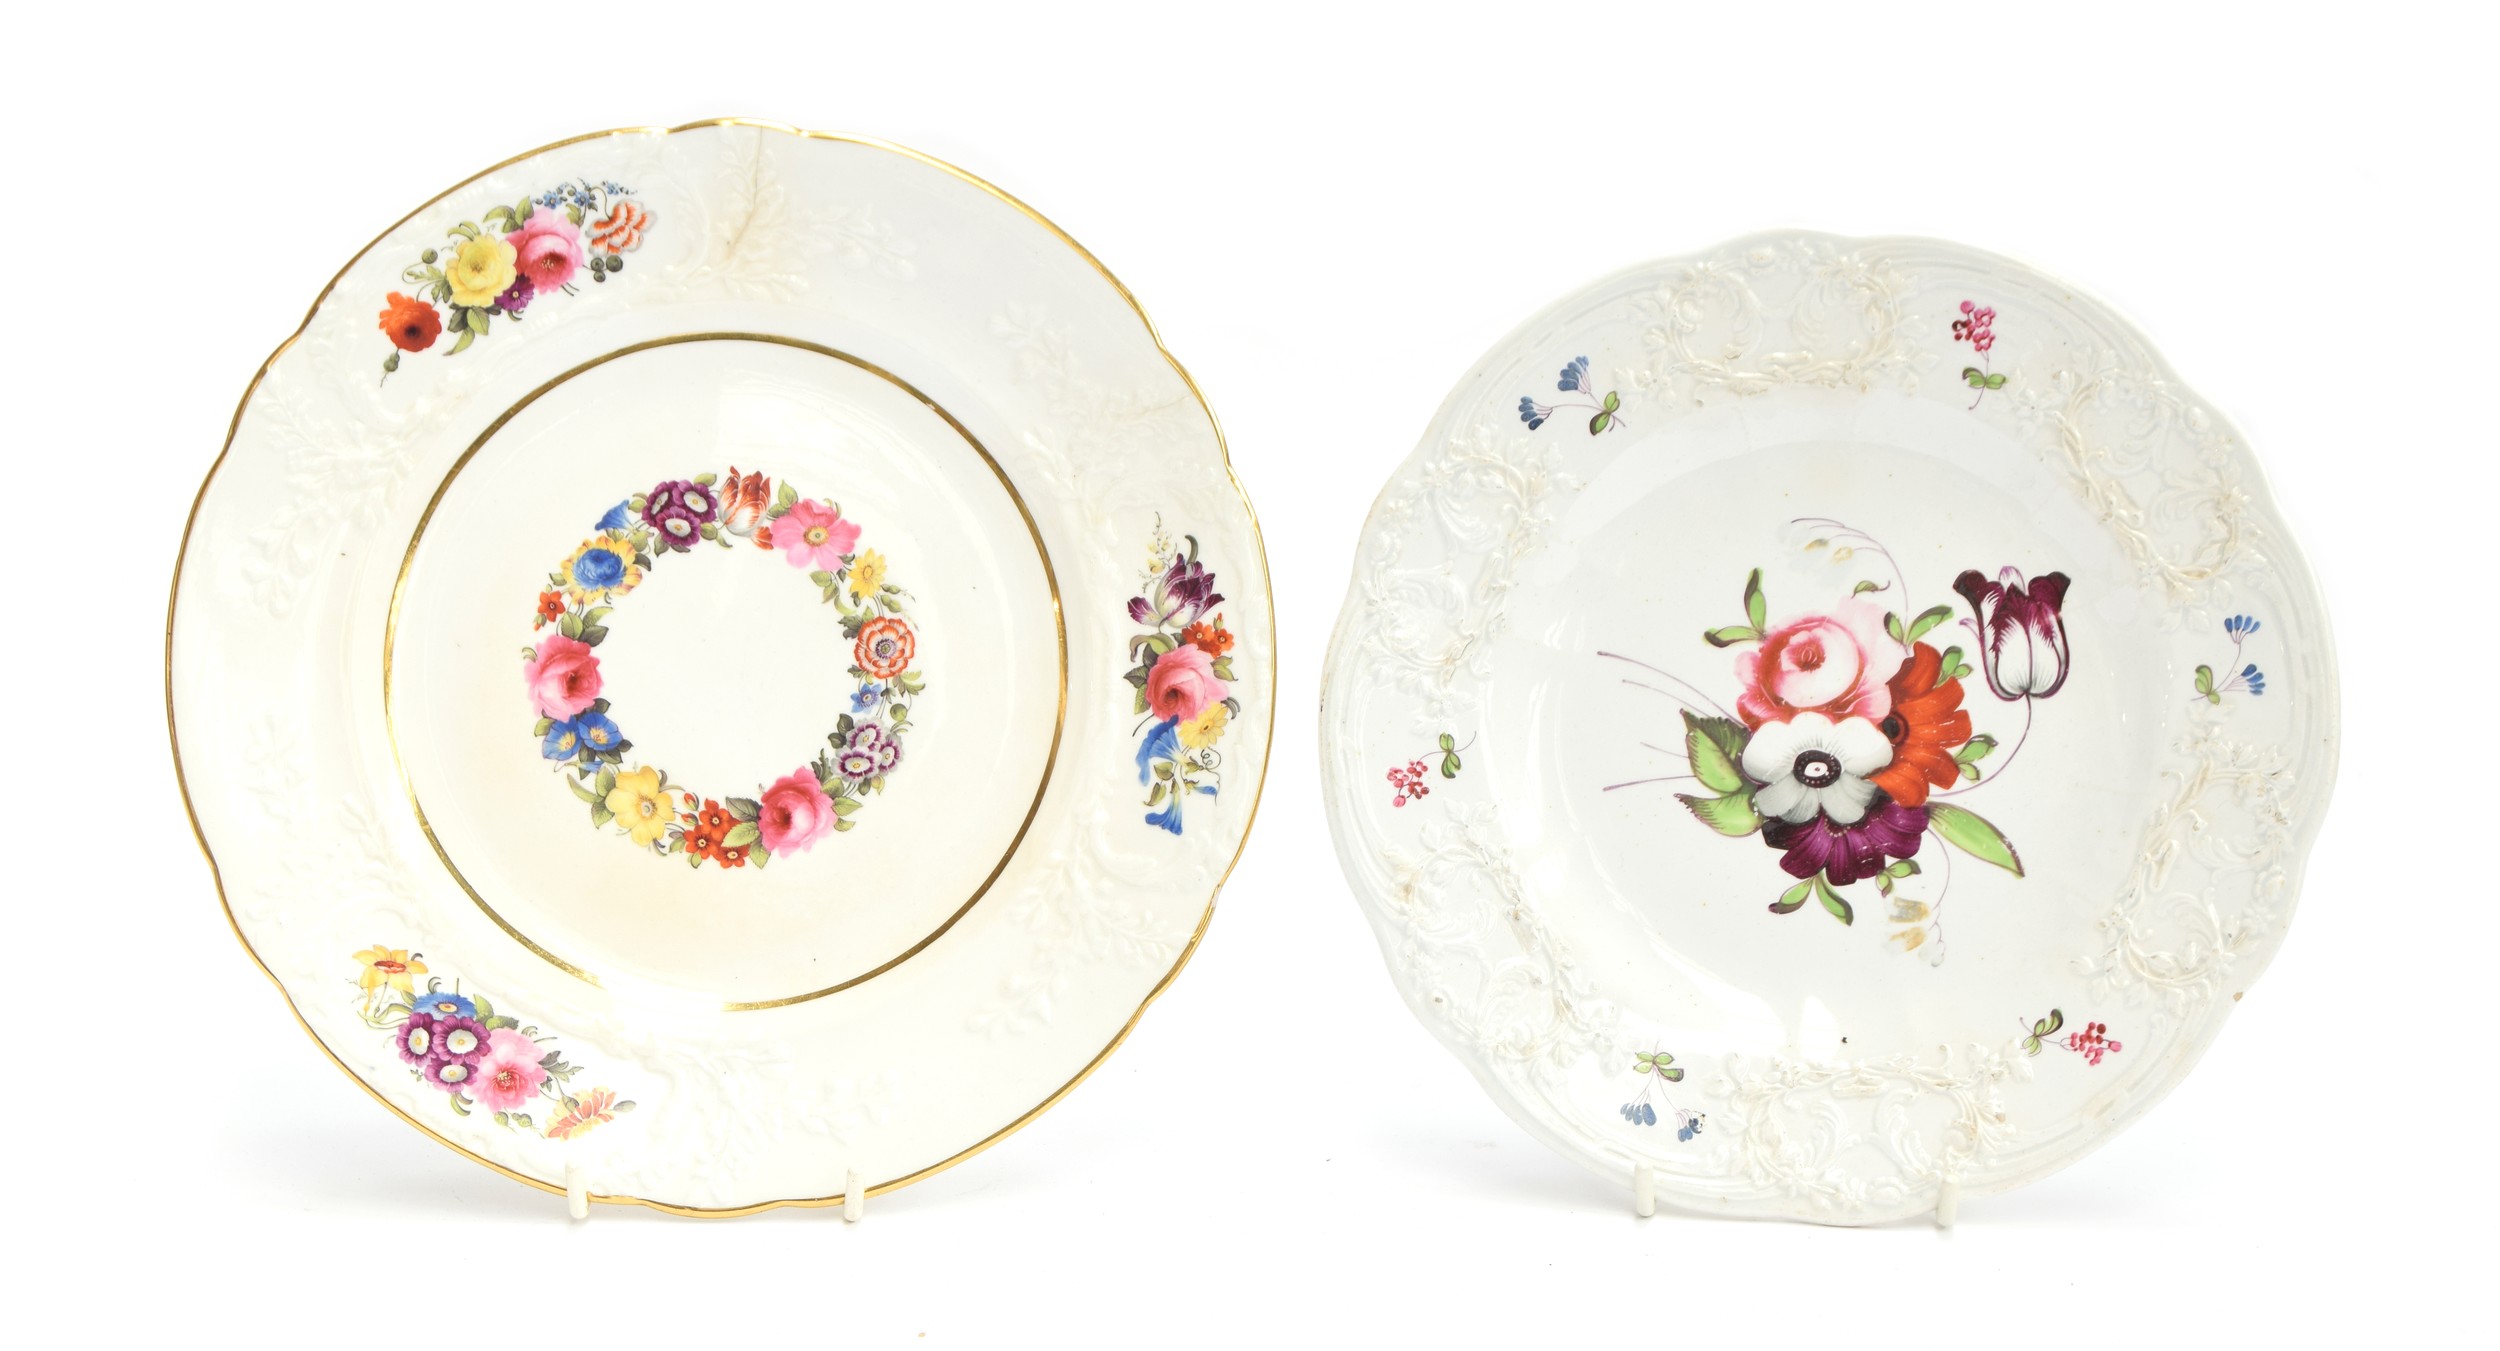 An early 19th century porcelain plate, likely Nantgarw, floral decoration similar to the Farnley